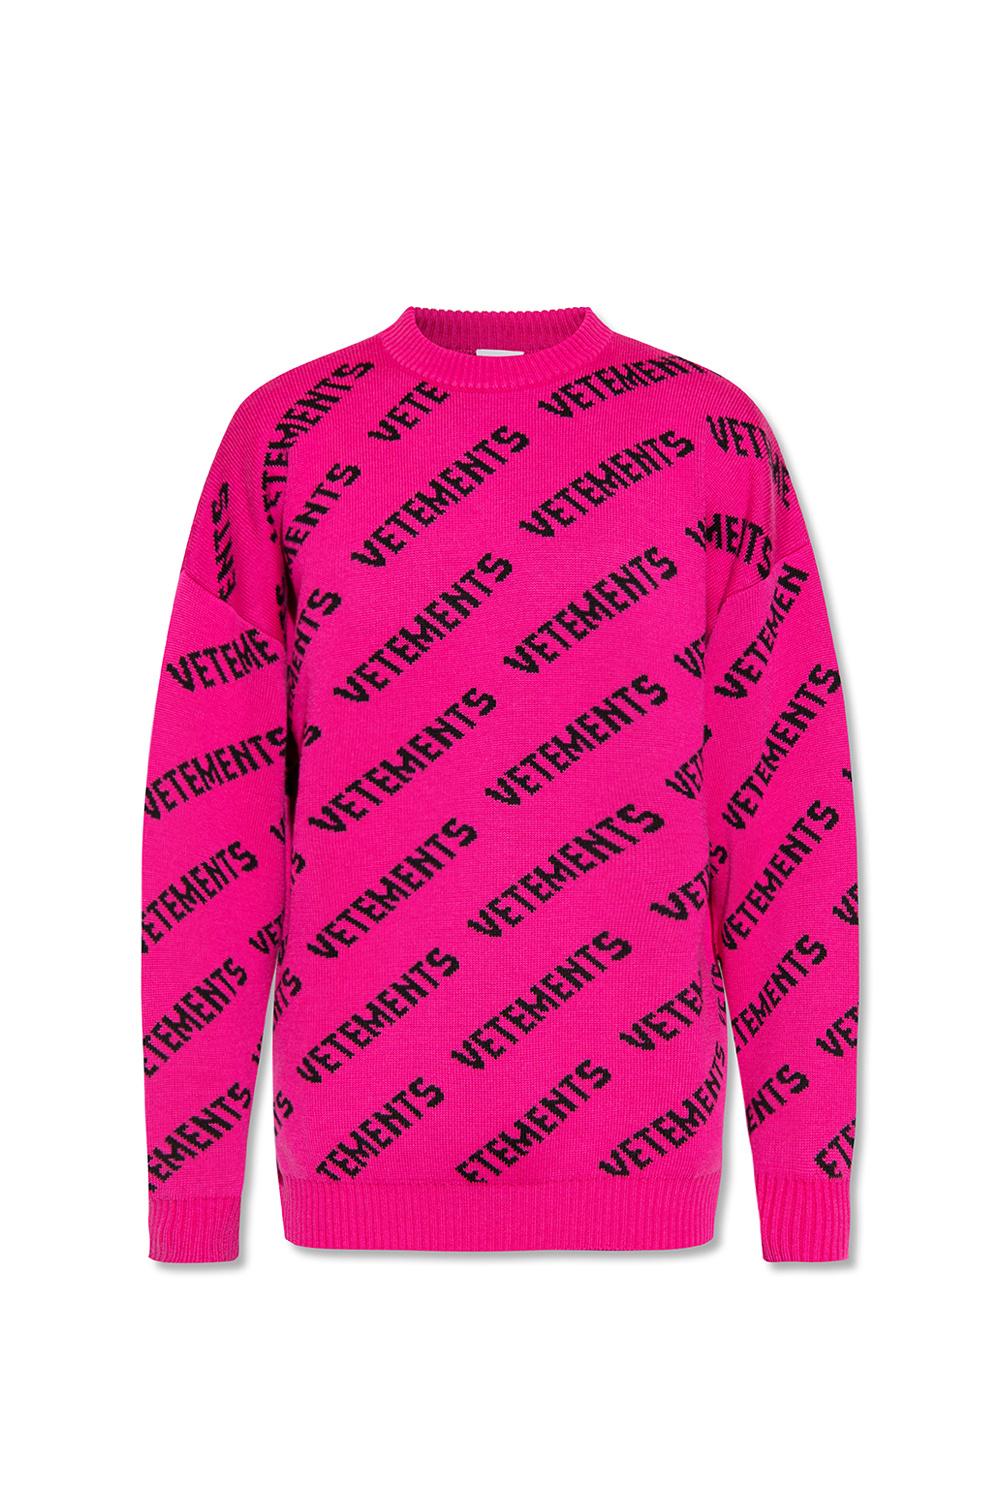 Vetements Sweater With Monogram in Pink for Men | Lyst